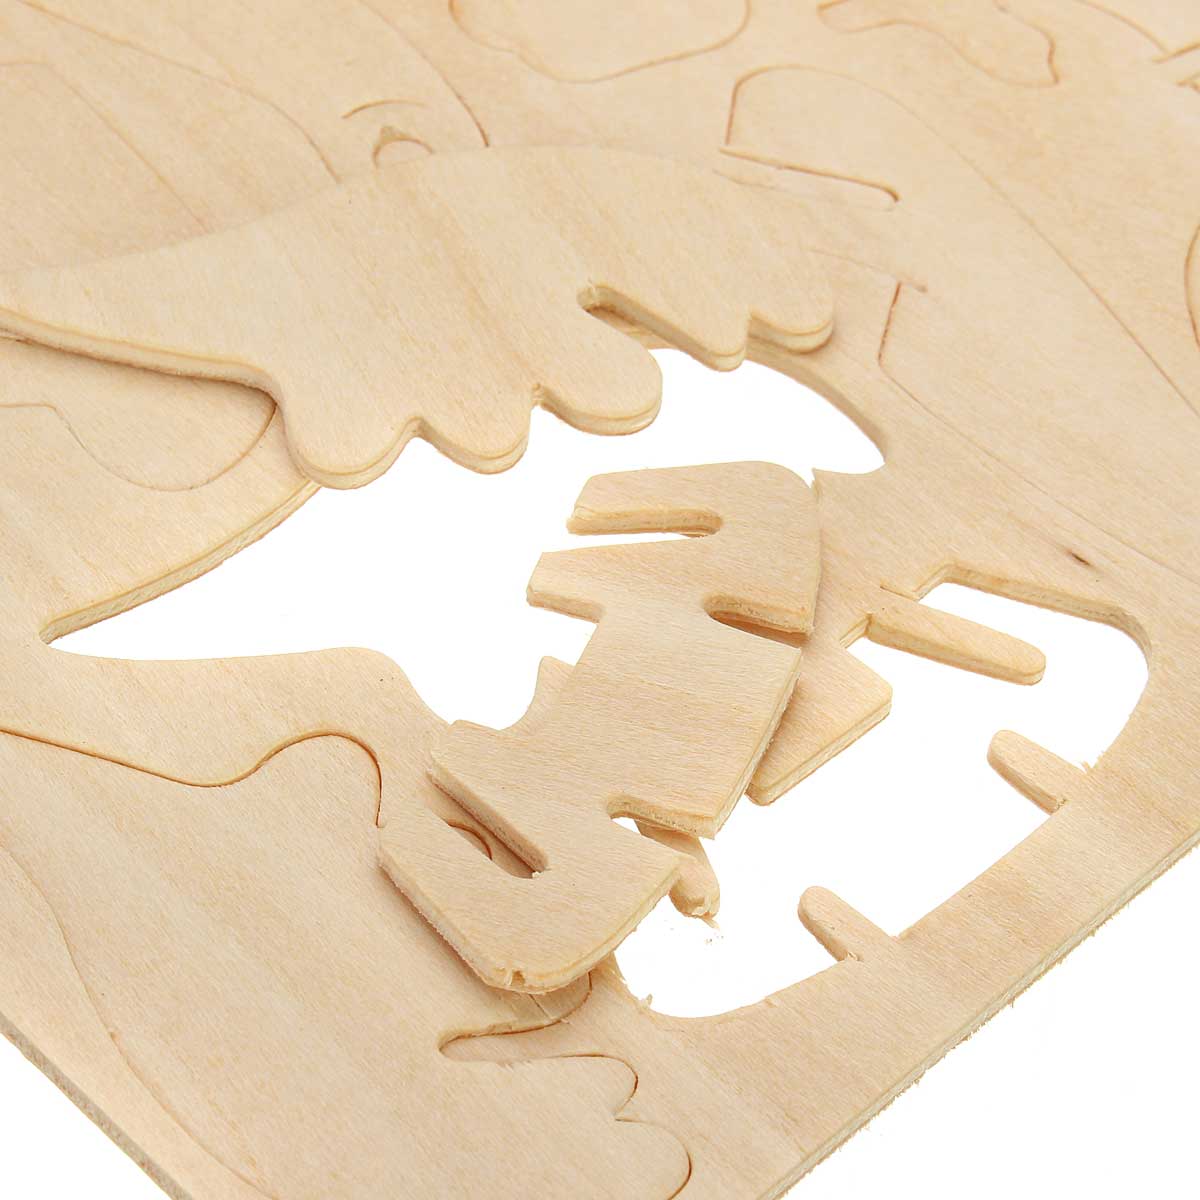 Wooden-3D-Puzzle-Jigsaw-Dragon-Snake-Animal-Shaped-Puzzles-Toy-Kids-Childs-Educational-Toys-Gift-1581229-4